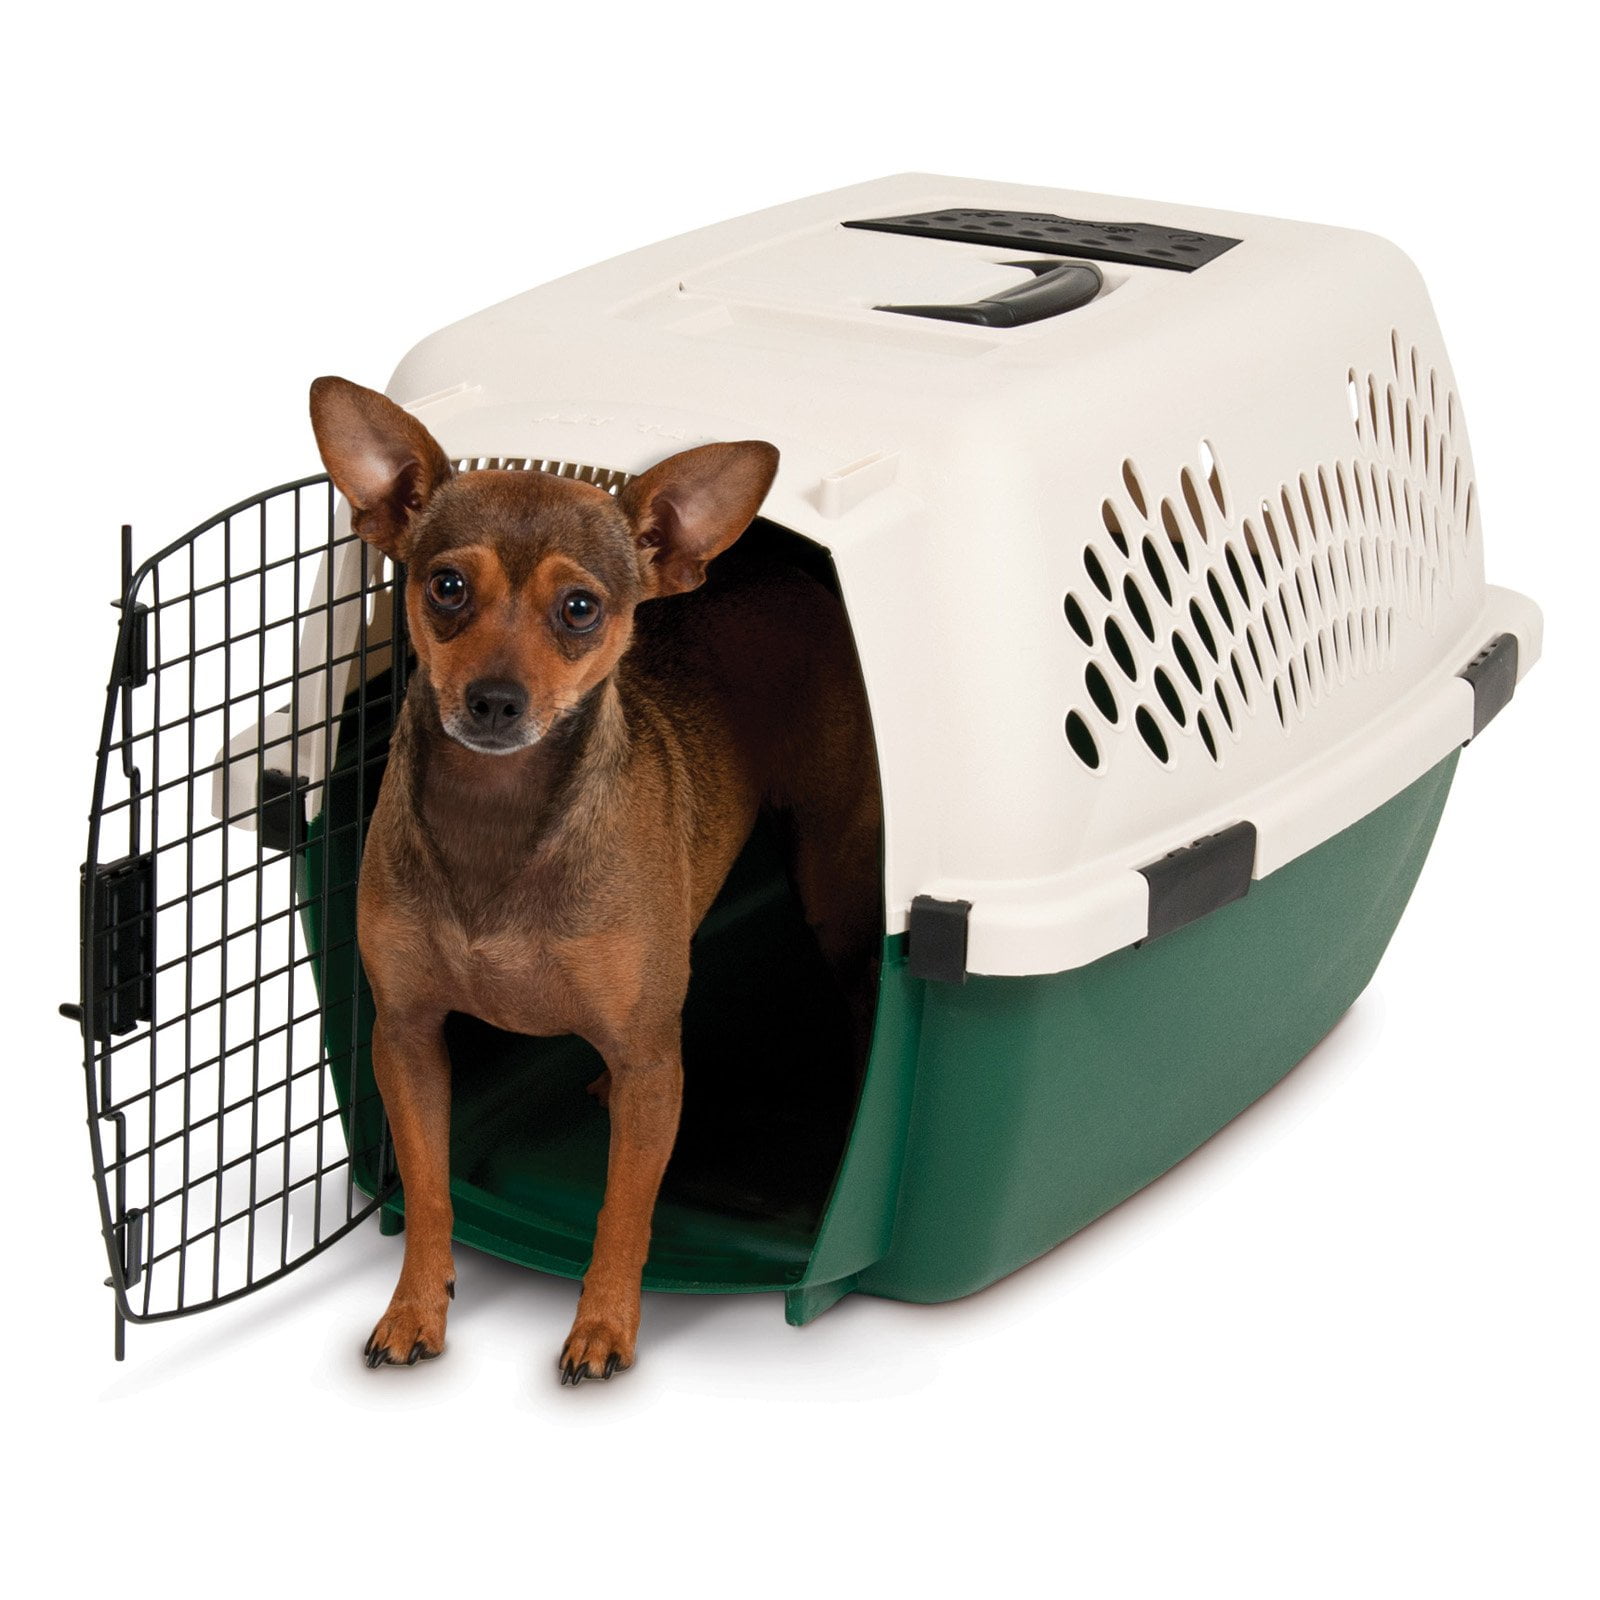 Petmate Ruffmaxx Plastic Dog Kennel, 40 inch Length, for Dogs 70-90 Pounds,  Tan/Green - Walmart.com